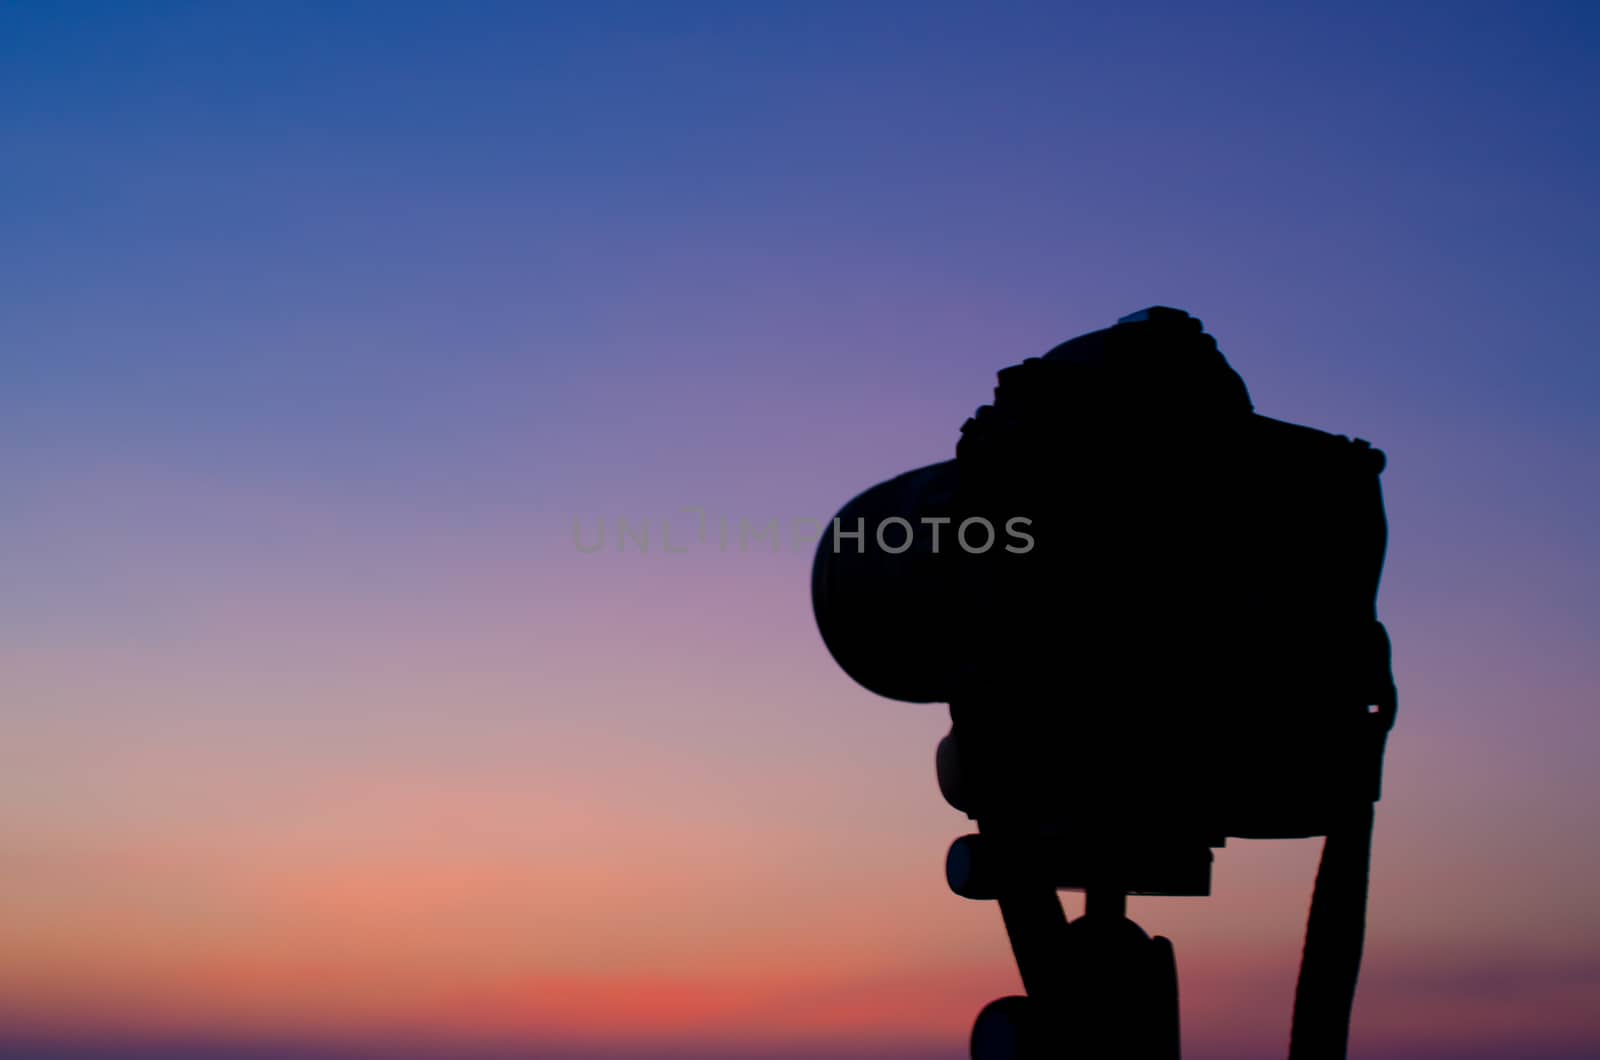 Silhouette of DSLR camera at sea with sunset sky